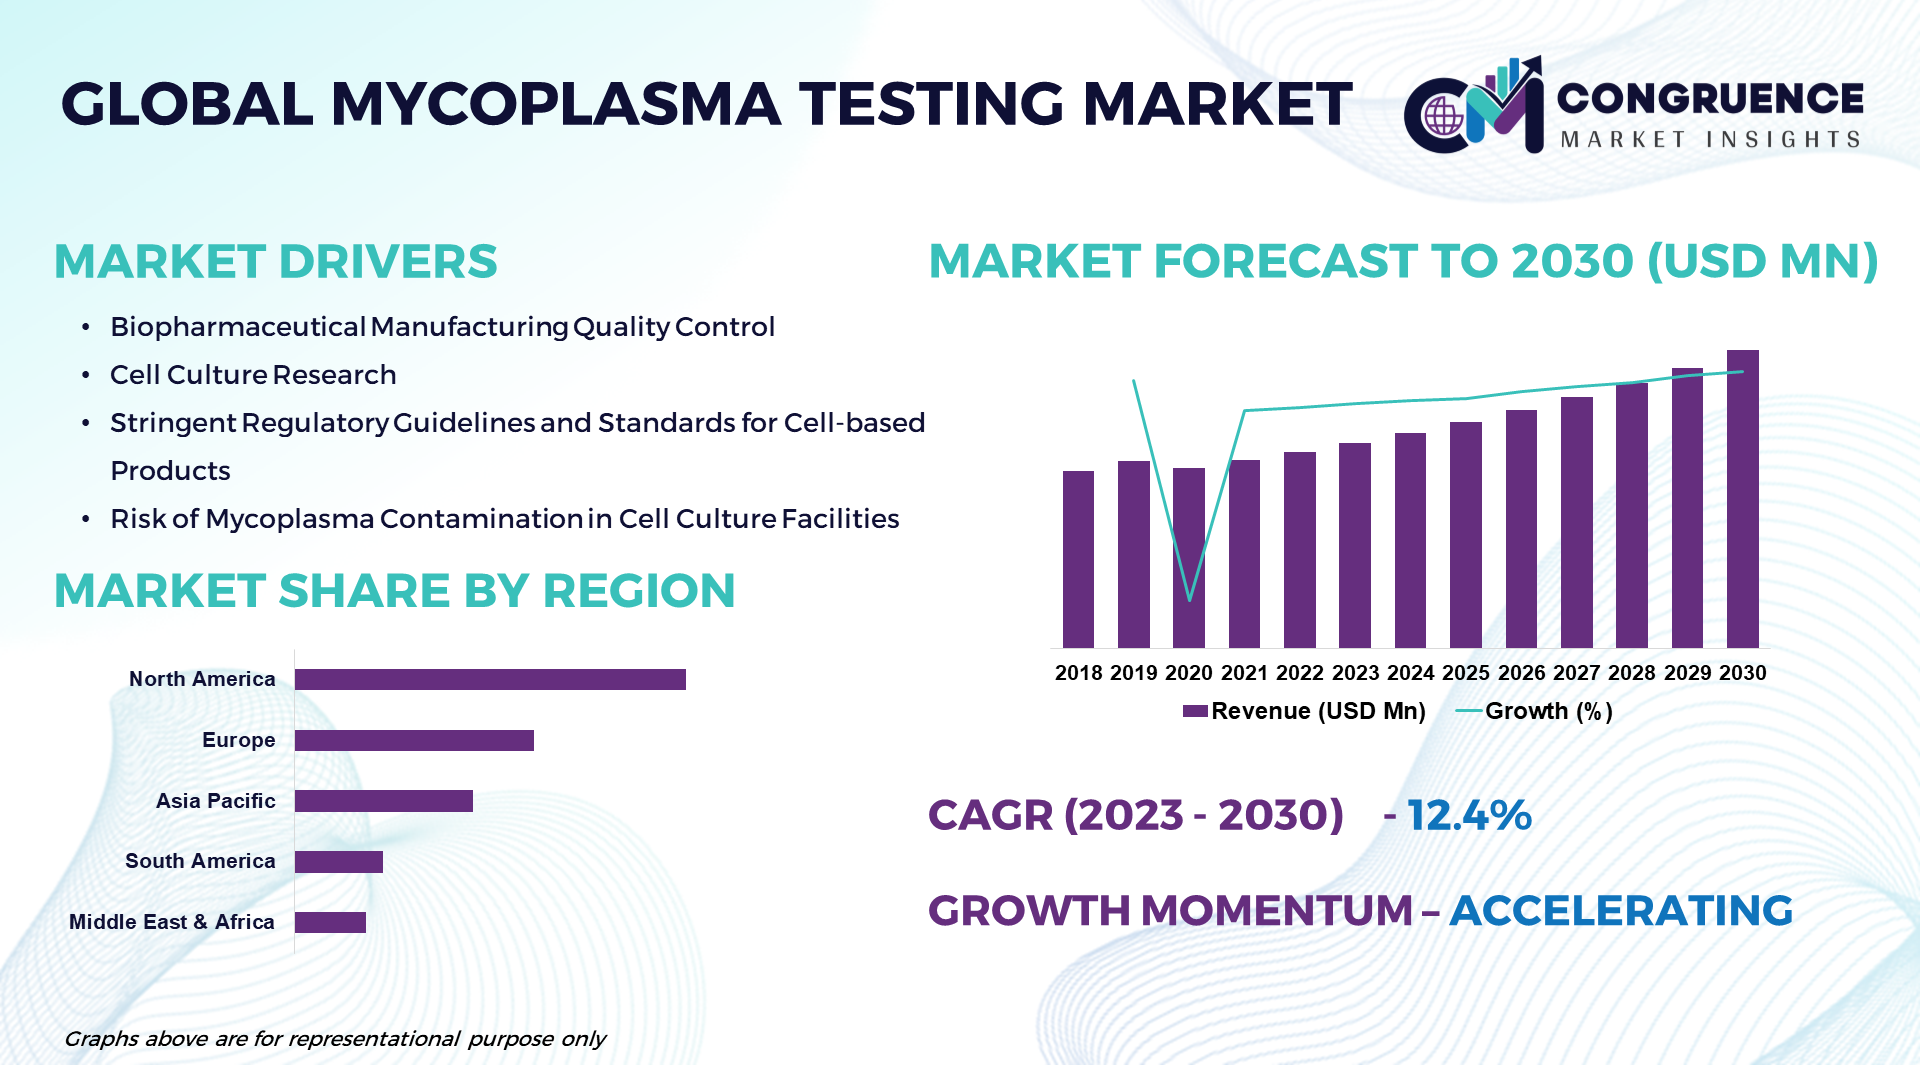 Mycoplasma Testing Market Positioned for Double-Digit CAGR Growth by 2030 | ThermoFisher, Merck, Lonza Group